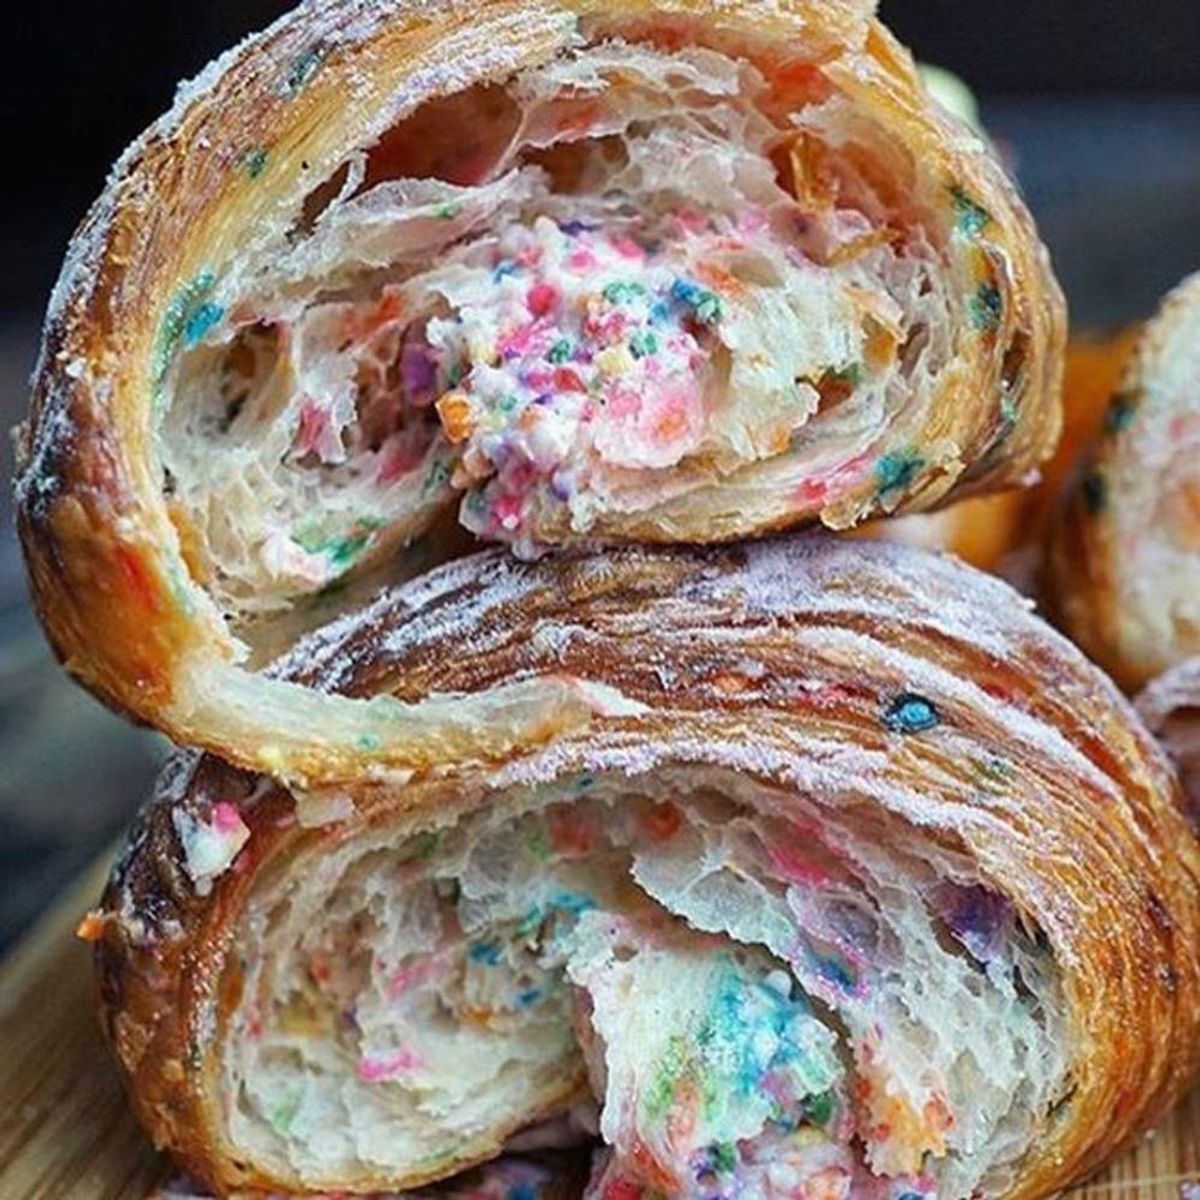 Birthday Cake Croissants Are the Stuff of Our Unicorn Dreams